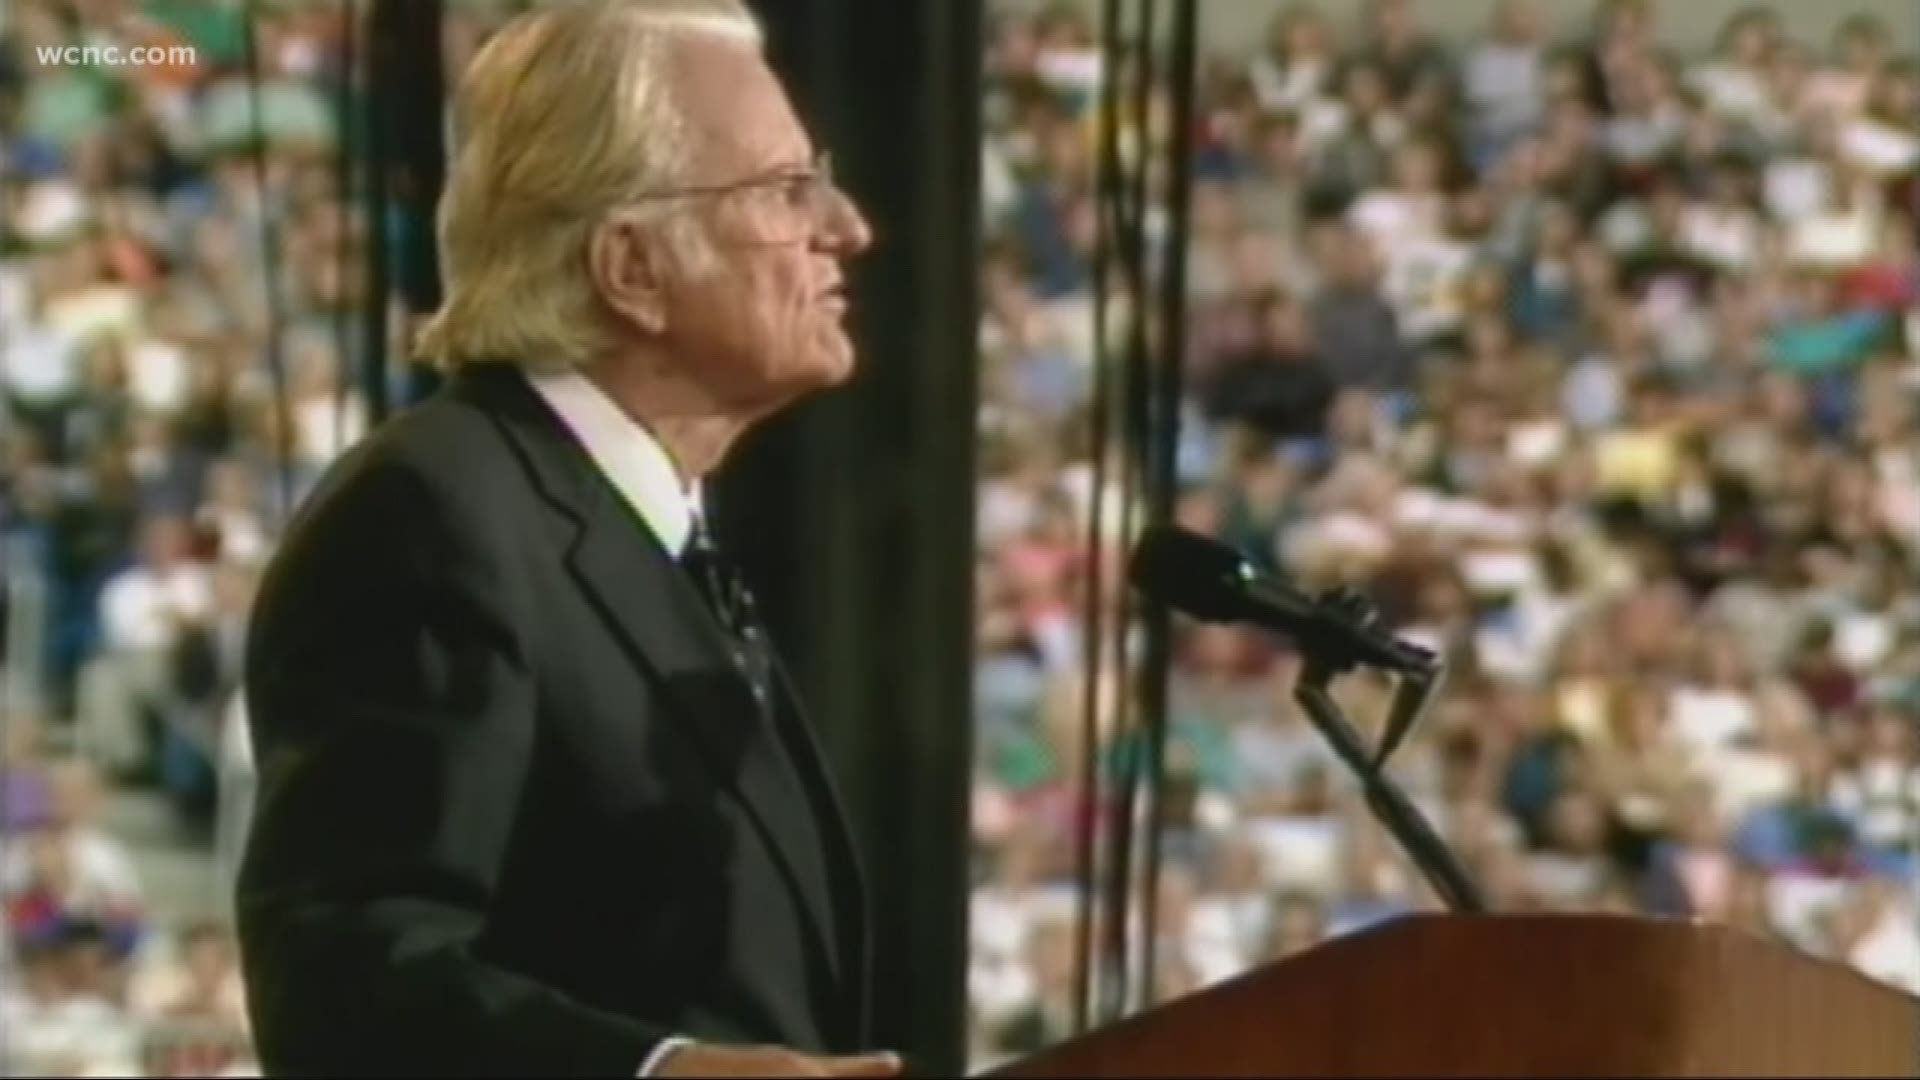 Public to begin paying their respects to Rev. Billy Graham